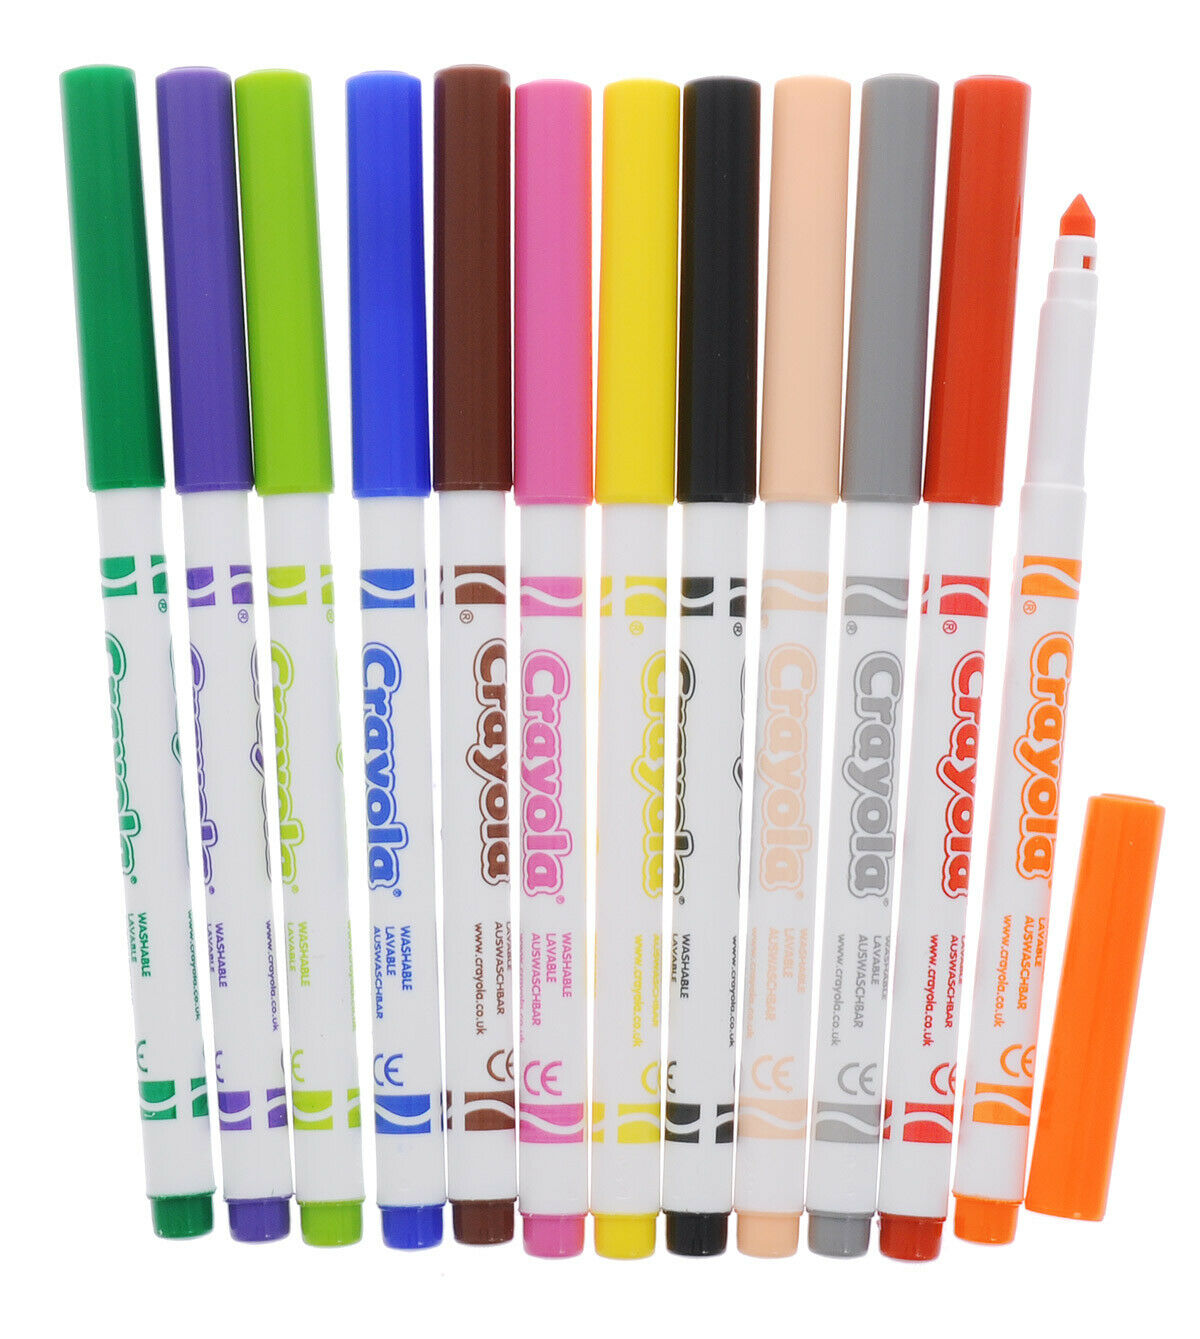 Count Super Tips Washable Markers For - Temu